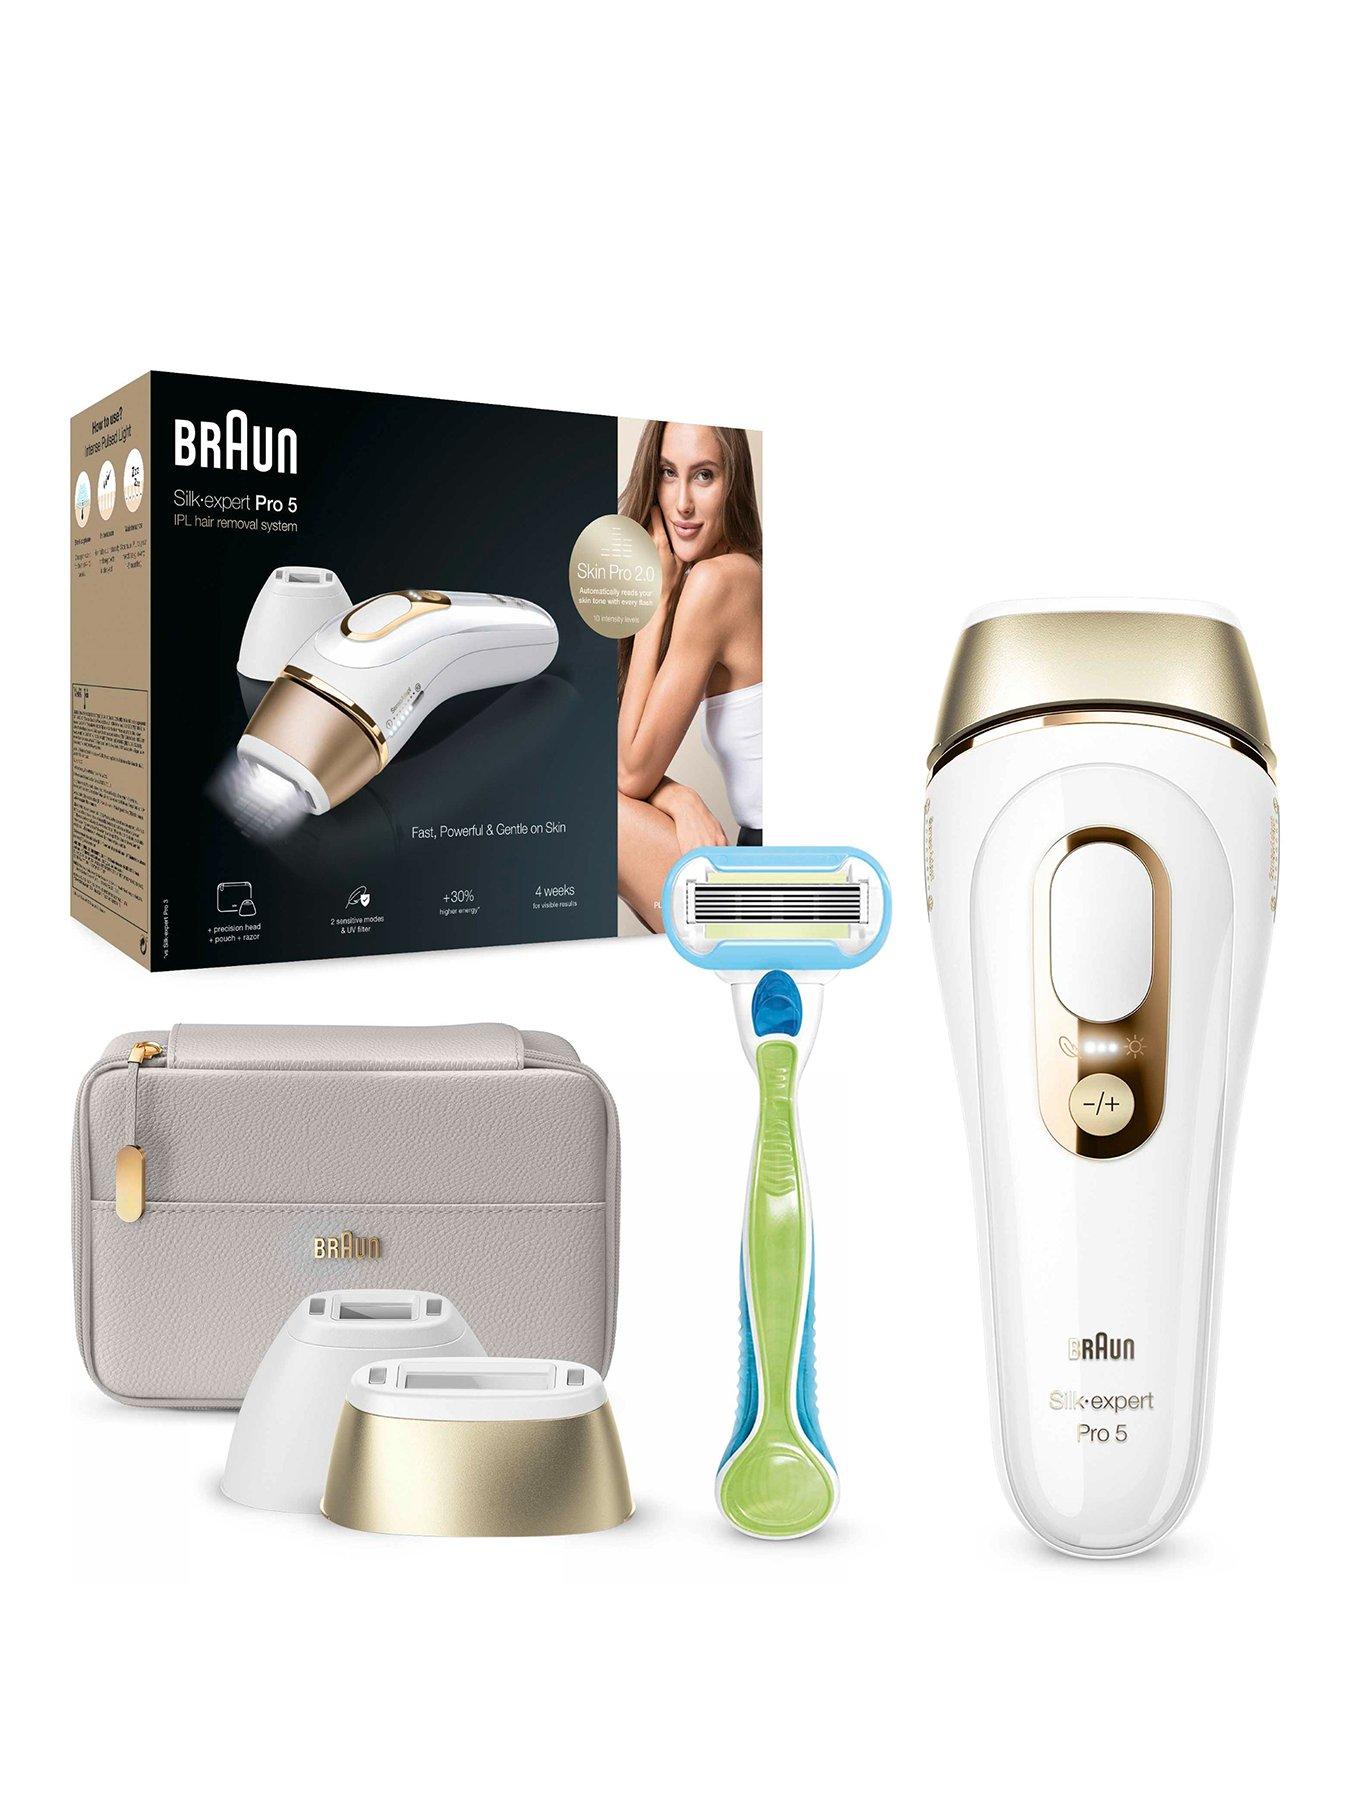 https://media.very.co.uk/i/very/NUWYP_SQ1_0000000088_NO_COLOR_SLf/braun-ipl-silk-expert-pro-5-at-home-hair-removal-device-with-pouch-pl5124nbsp--whitegold.jpg?$180x240_retinamobilex2$